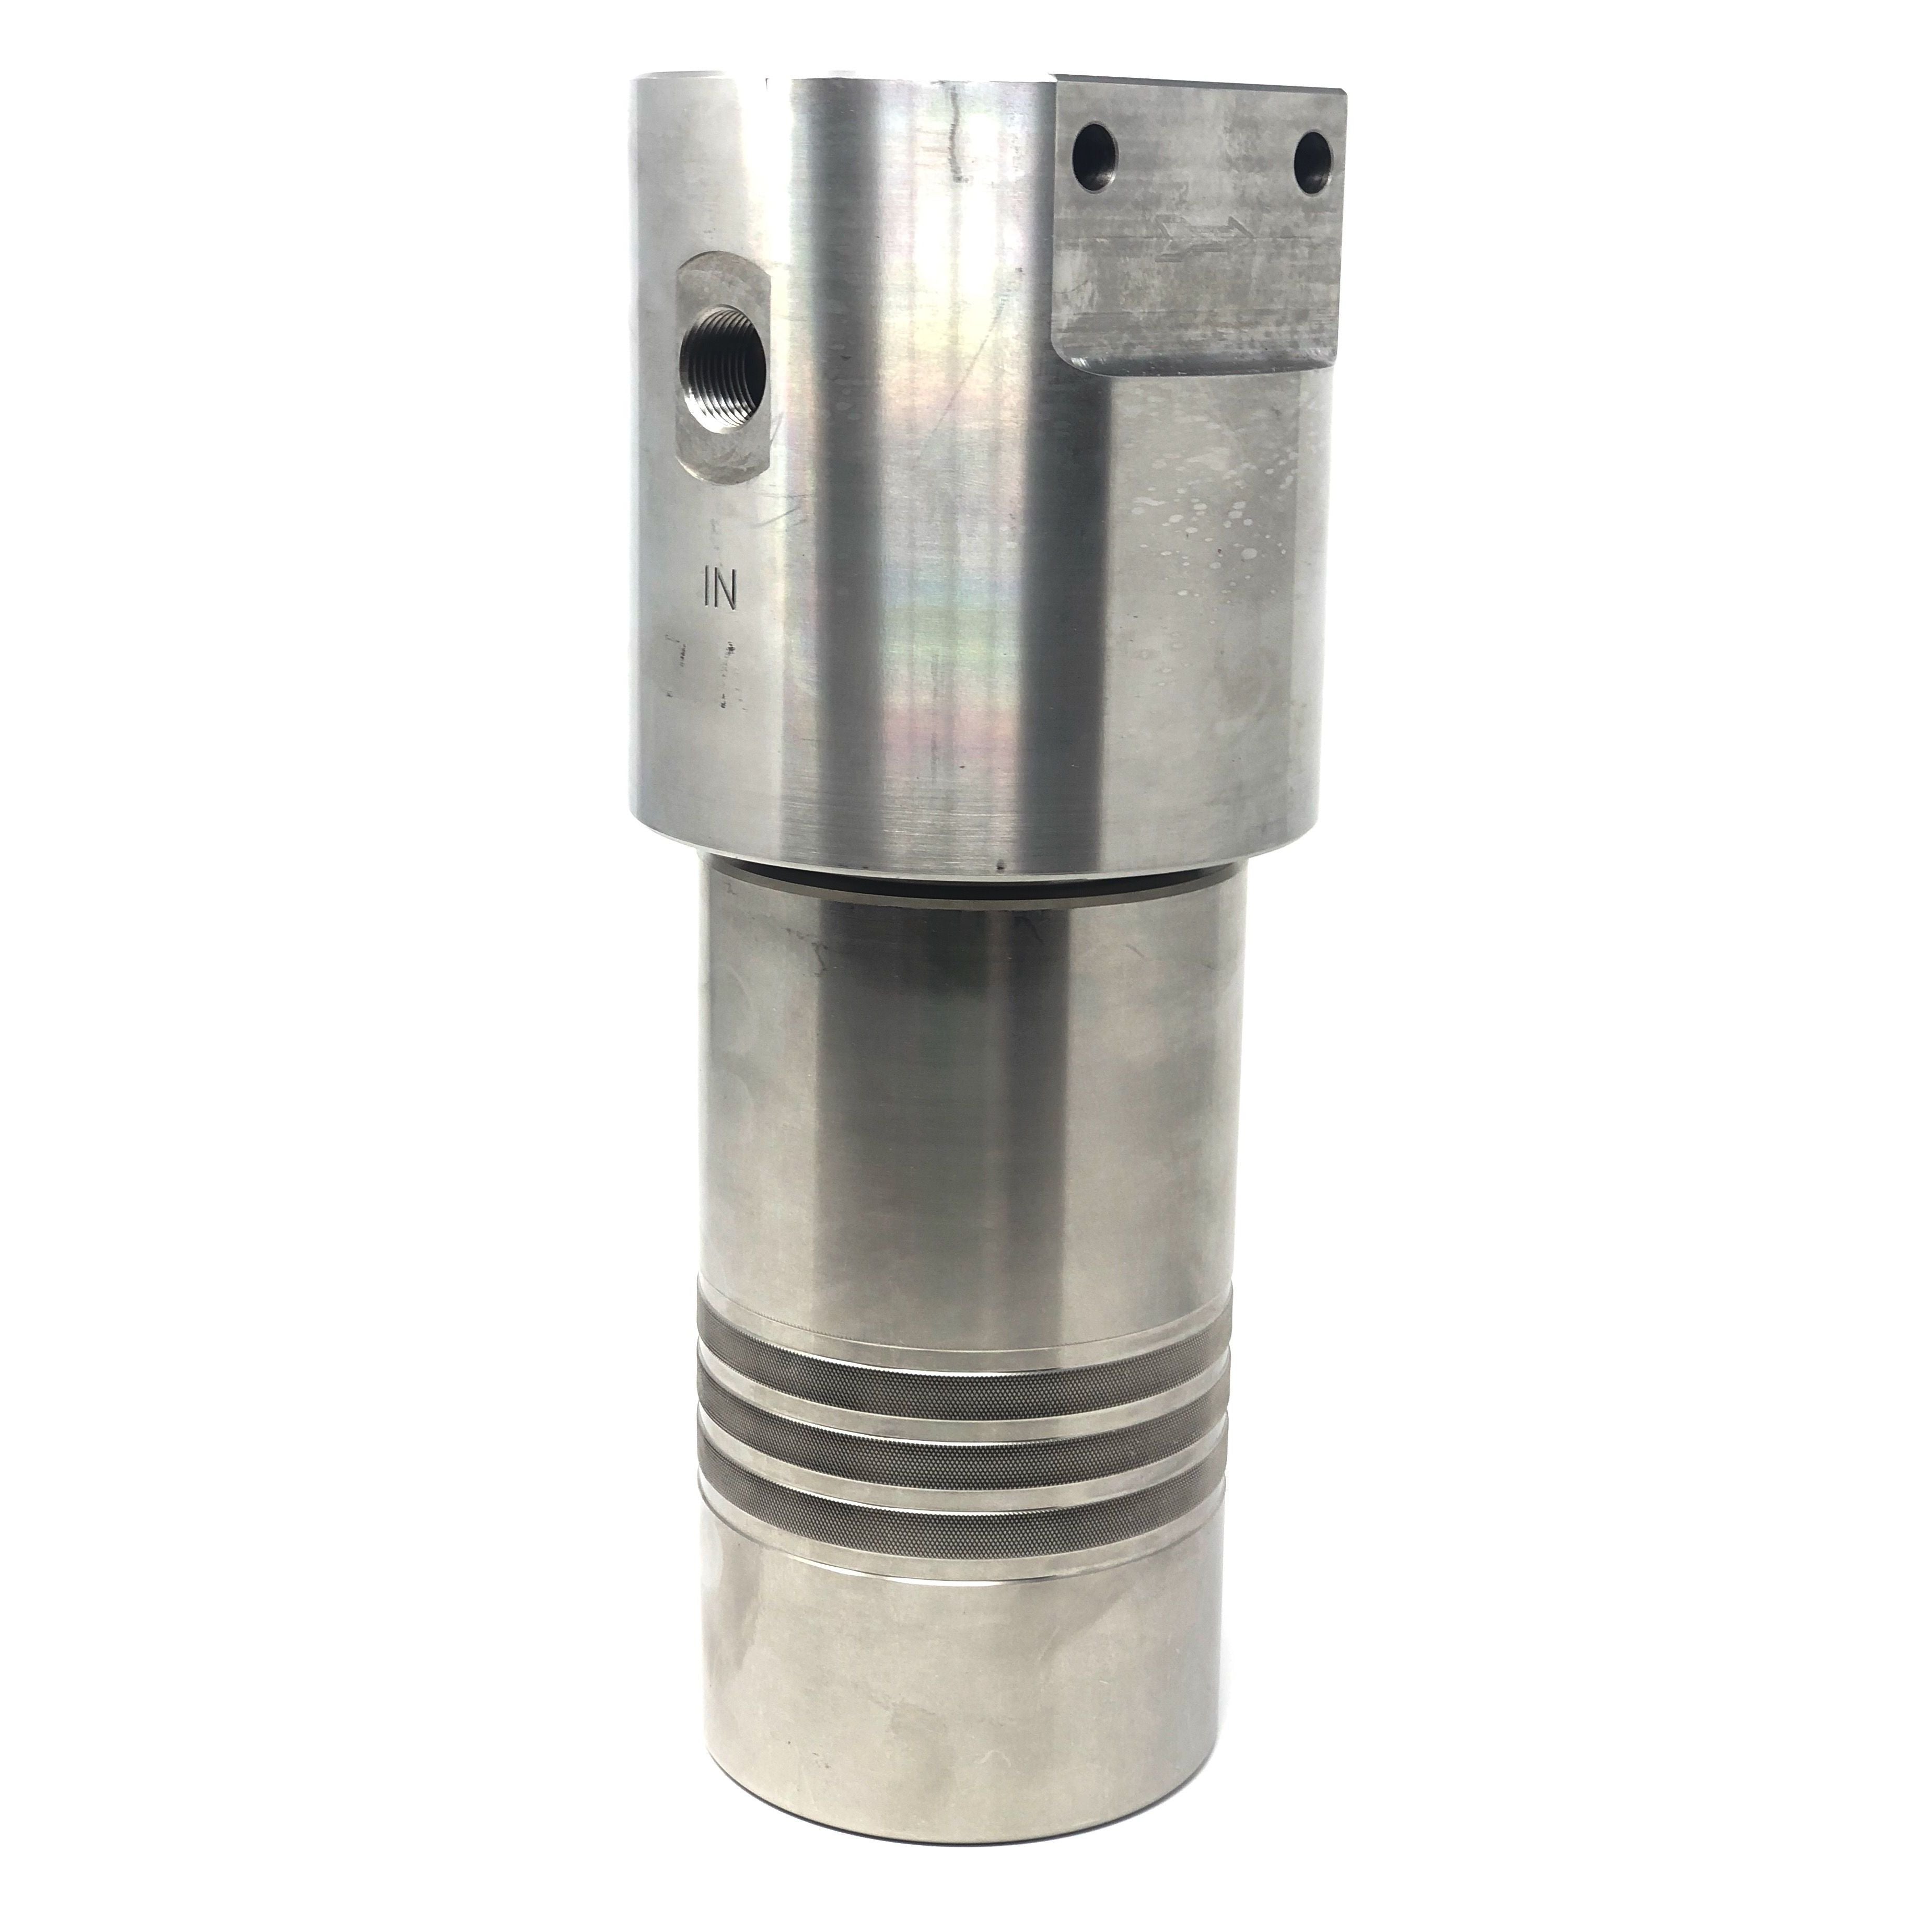 52S-244N-25SEN : Chase Ultra High Pressure Inline Filter, 10000psi, 1/4" NPT, 25 Micron, With Visual Indicator, No Bypass